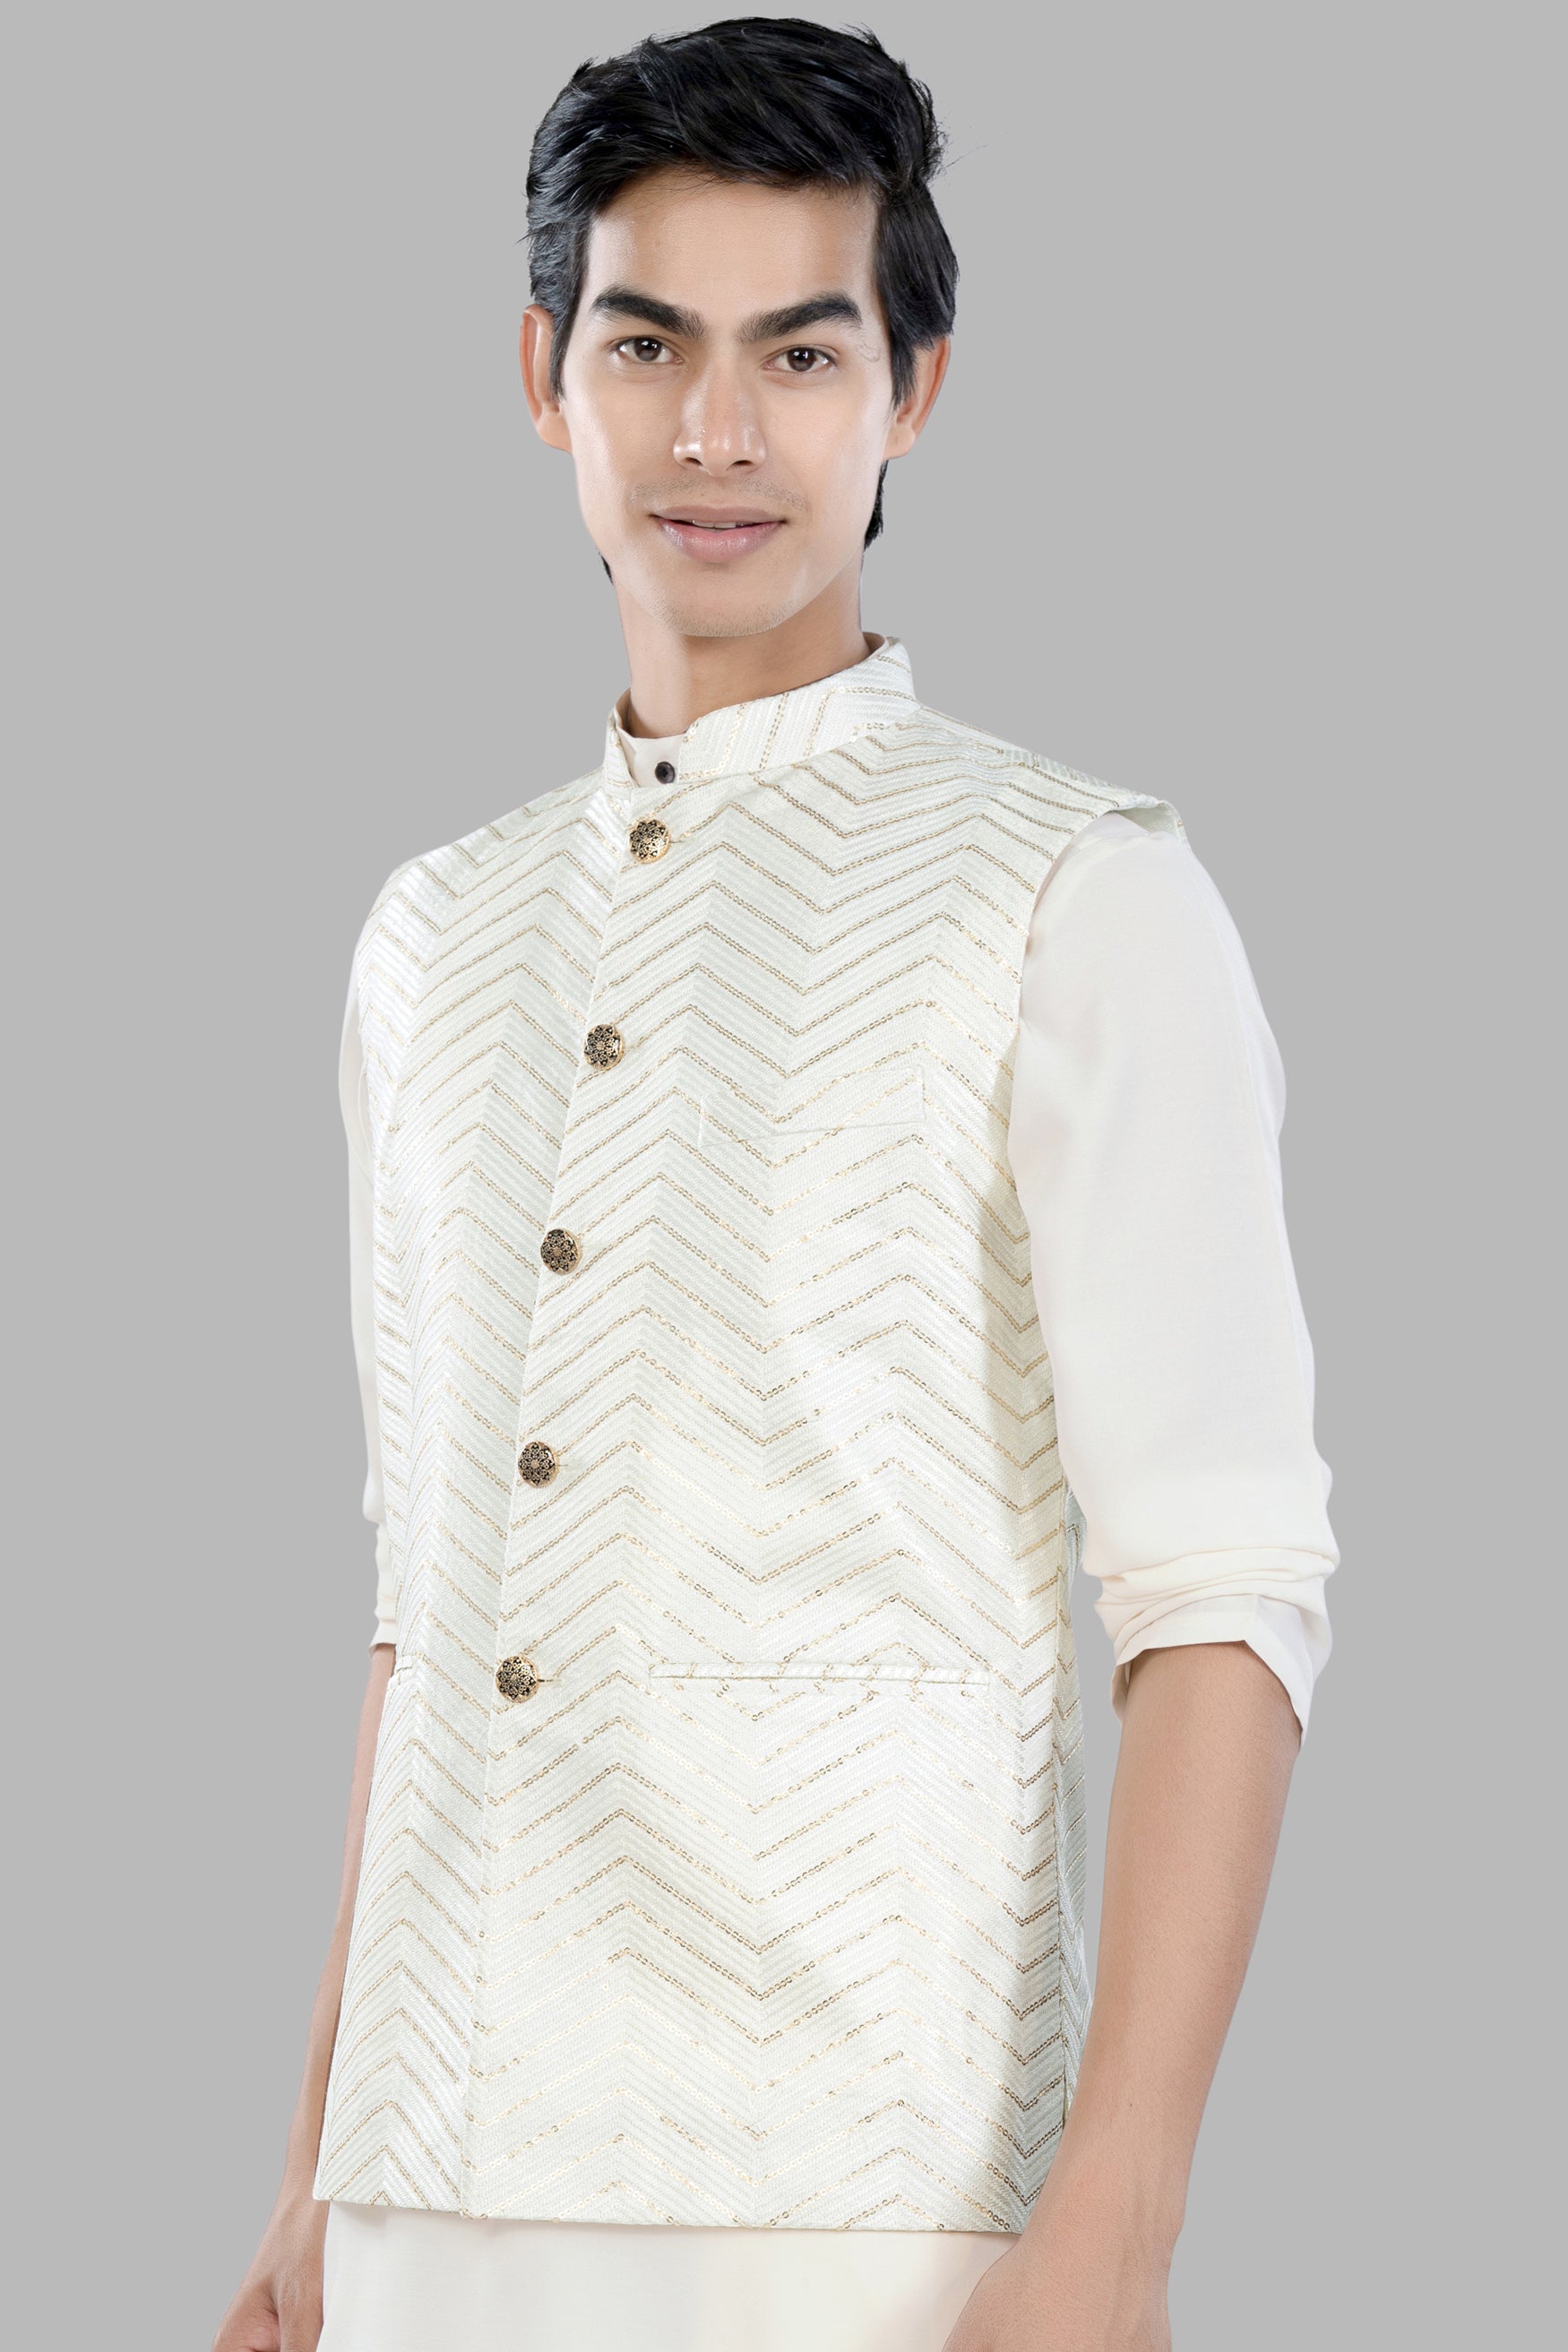 Bright White Chevron Sequin and Thread Embroidered Designer Nehru Jacket WC3472-36,  WC3472-38,  WC3472-40,  WC3472-42,  WC3472-44,  WC3472-46,  WC3472-48,  WC3472-50,  WC3472-52,  WC3472-54,  WC3472-56,  WC3472-58,  WC3472-60